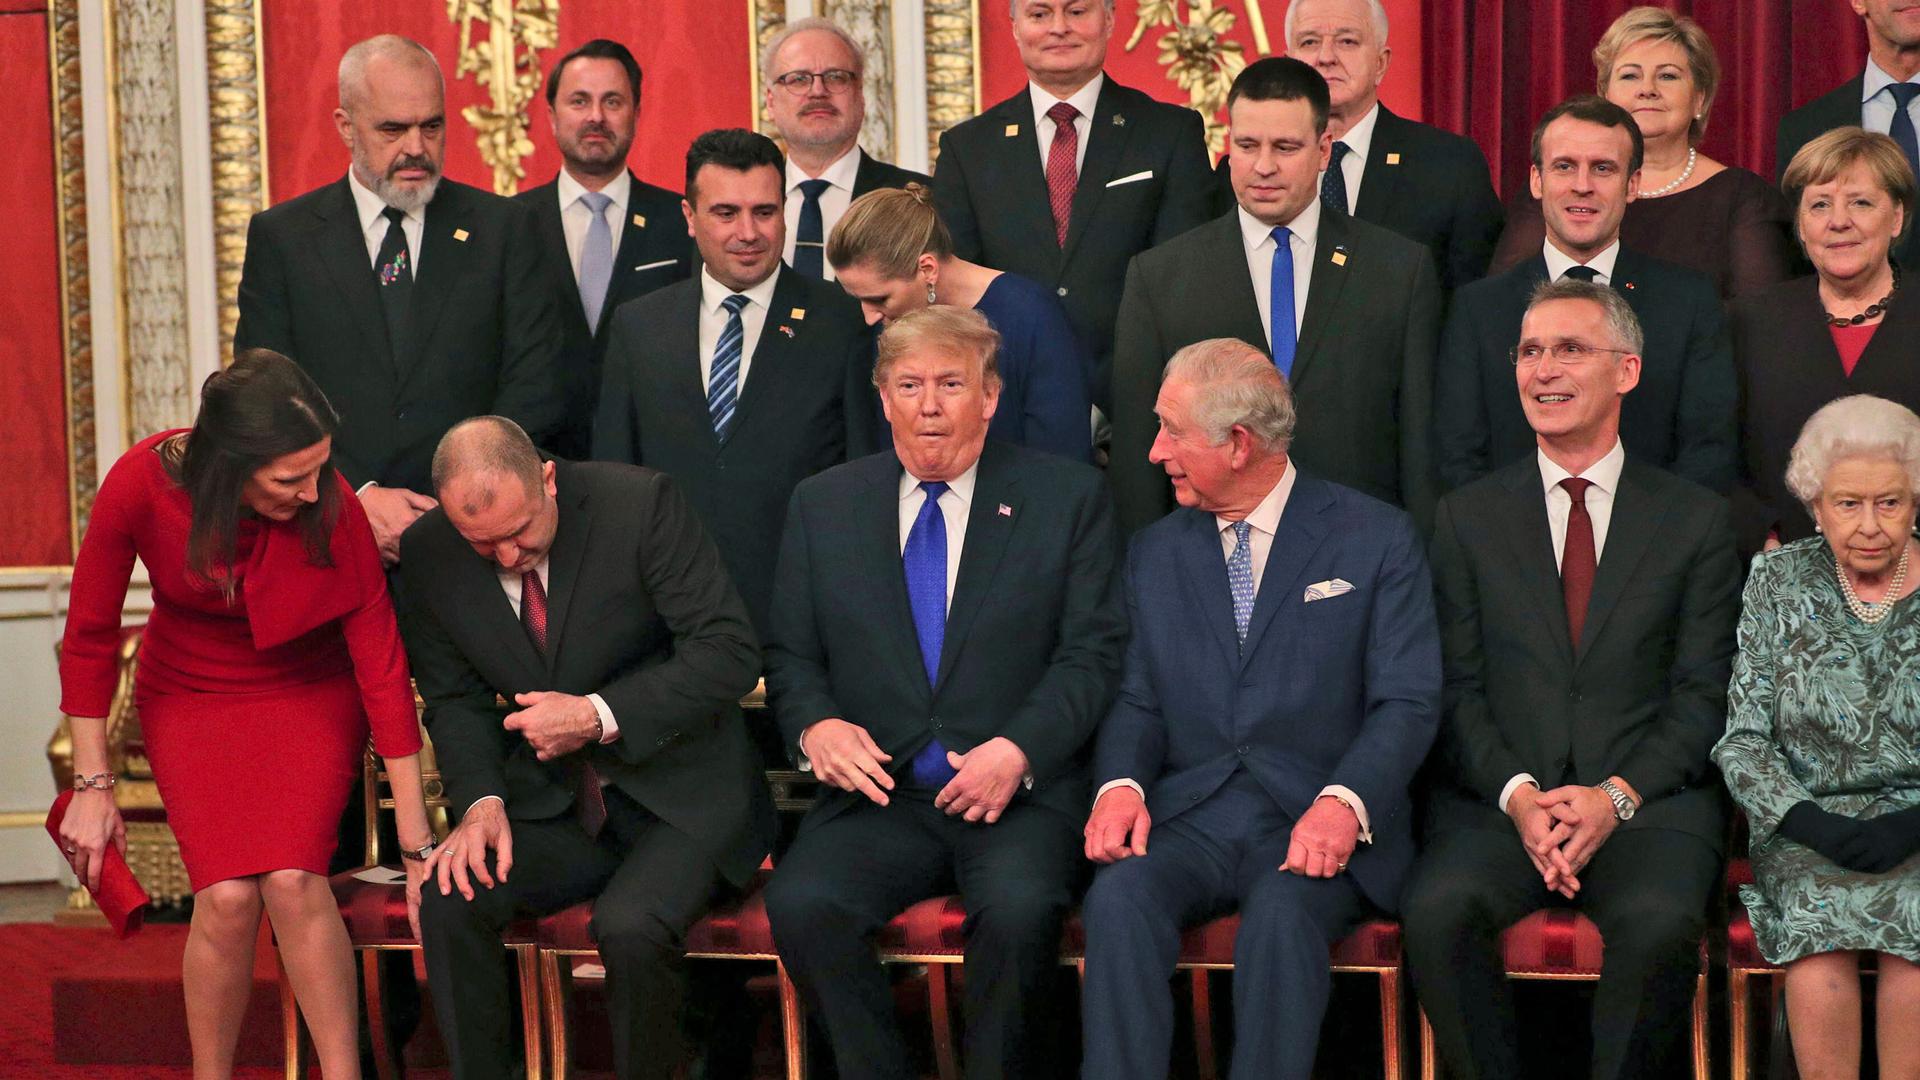 US President Donald Trump, centre left, and the Prince Charles The Prince of Wales, centre right, join other NATO leaders before posing for a formal group photo